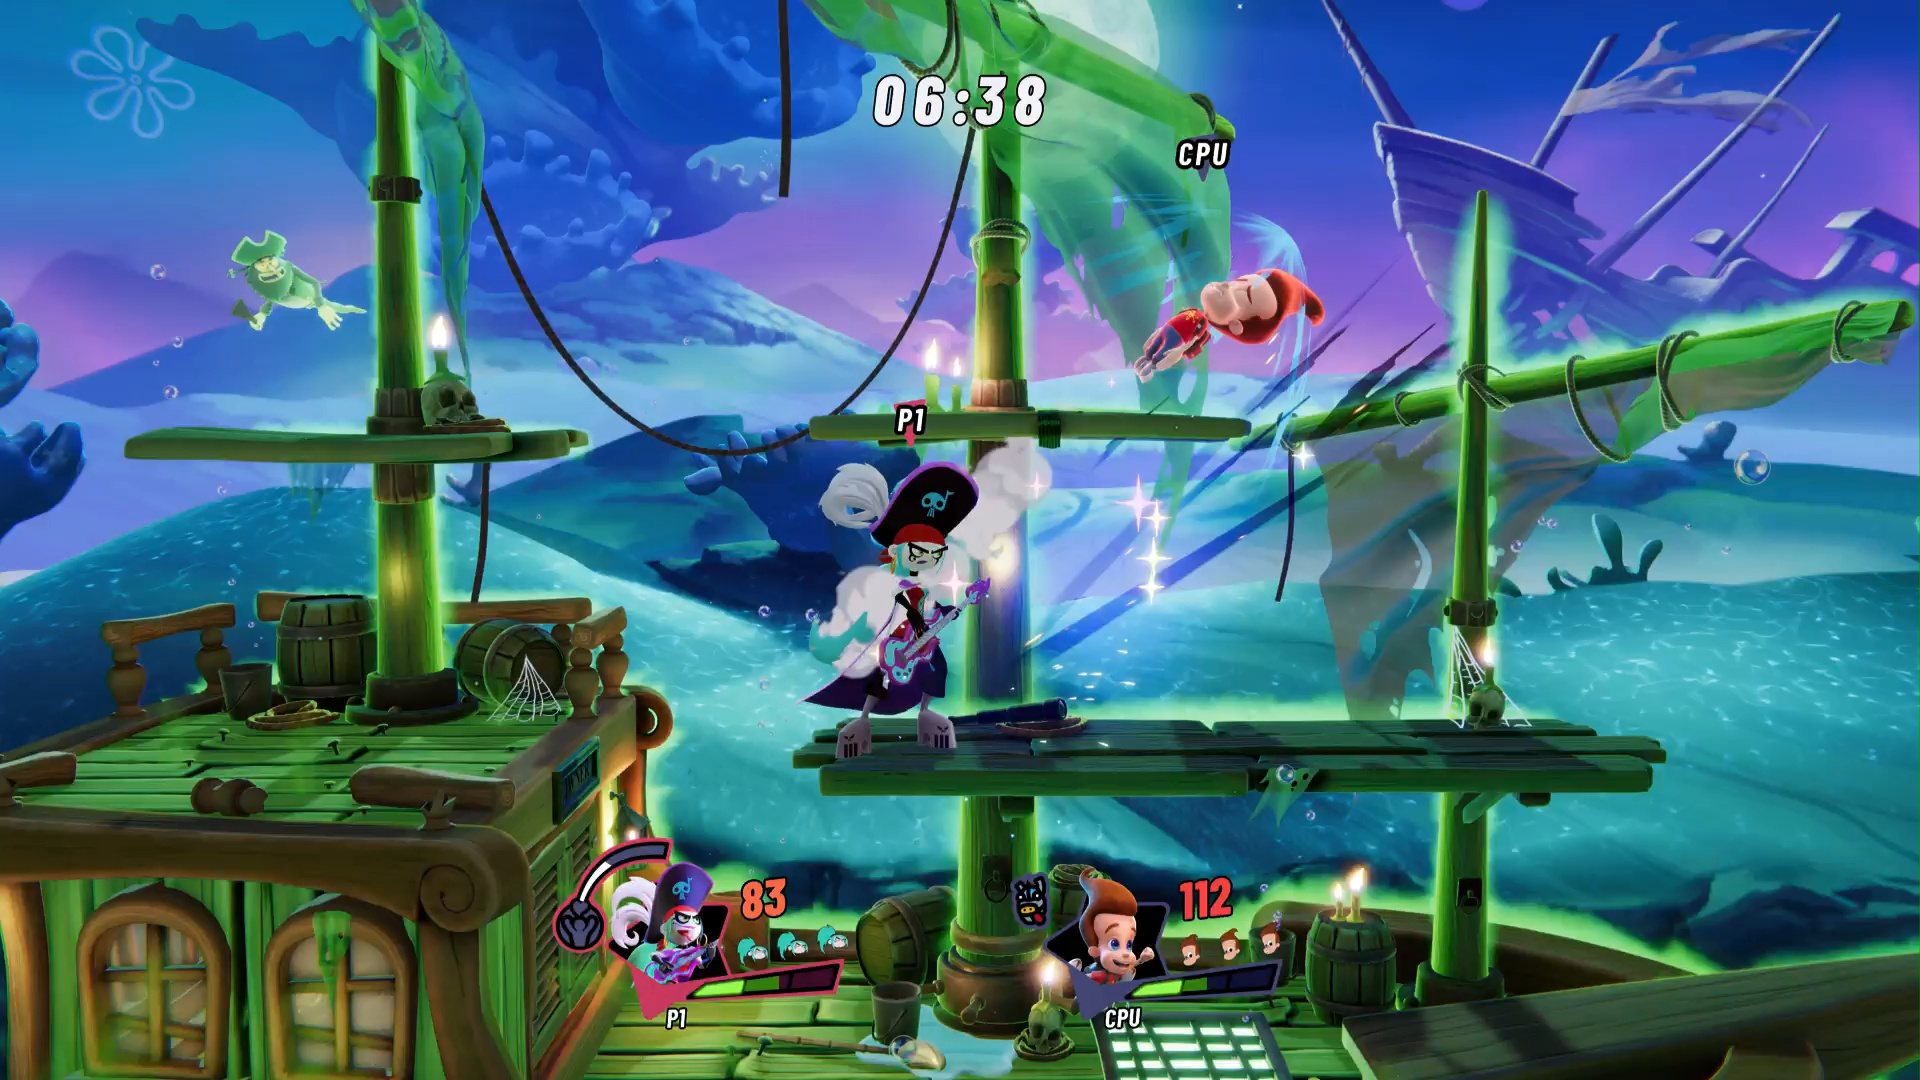 Fighting on the Flying Dutchman stage in Nickelodeon All-Star Brawl 2